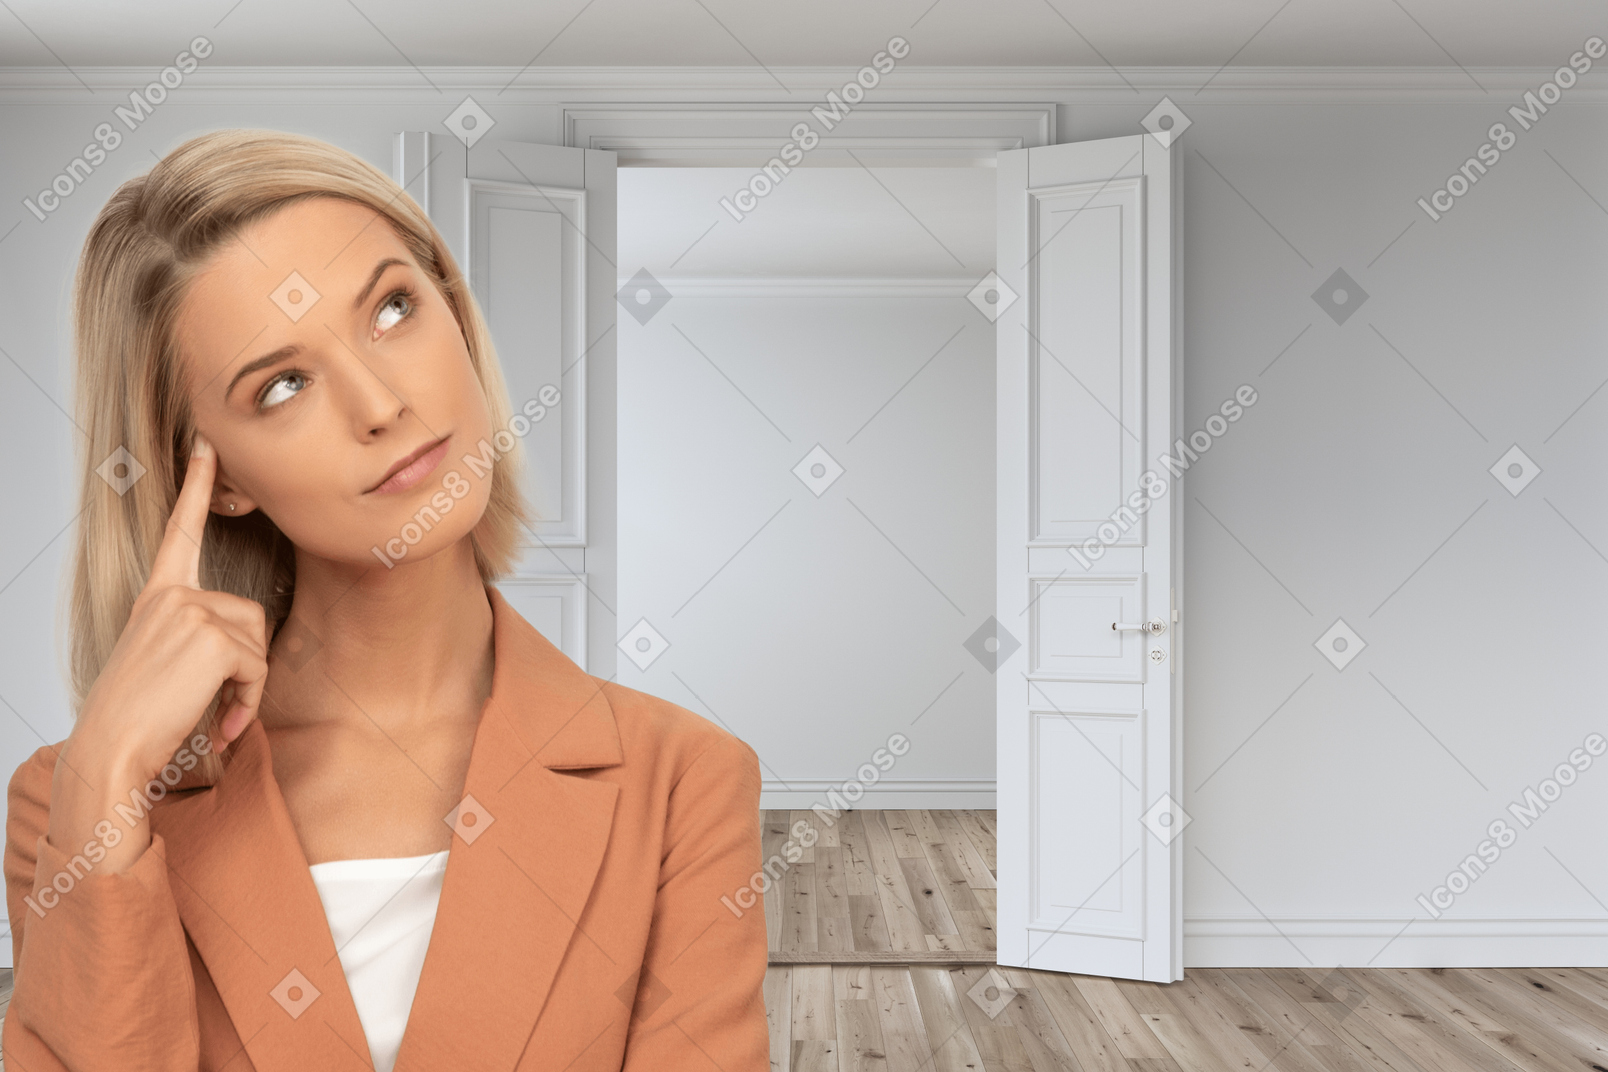 Portrait of thoughtful woman in white room